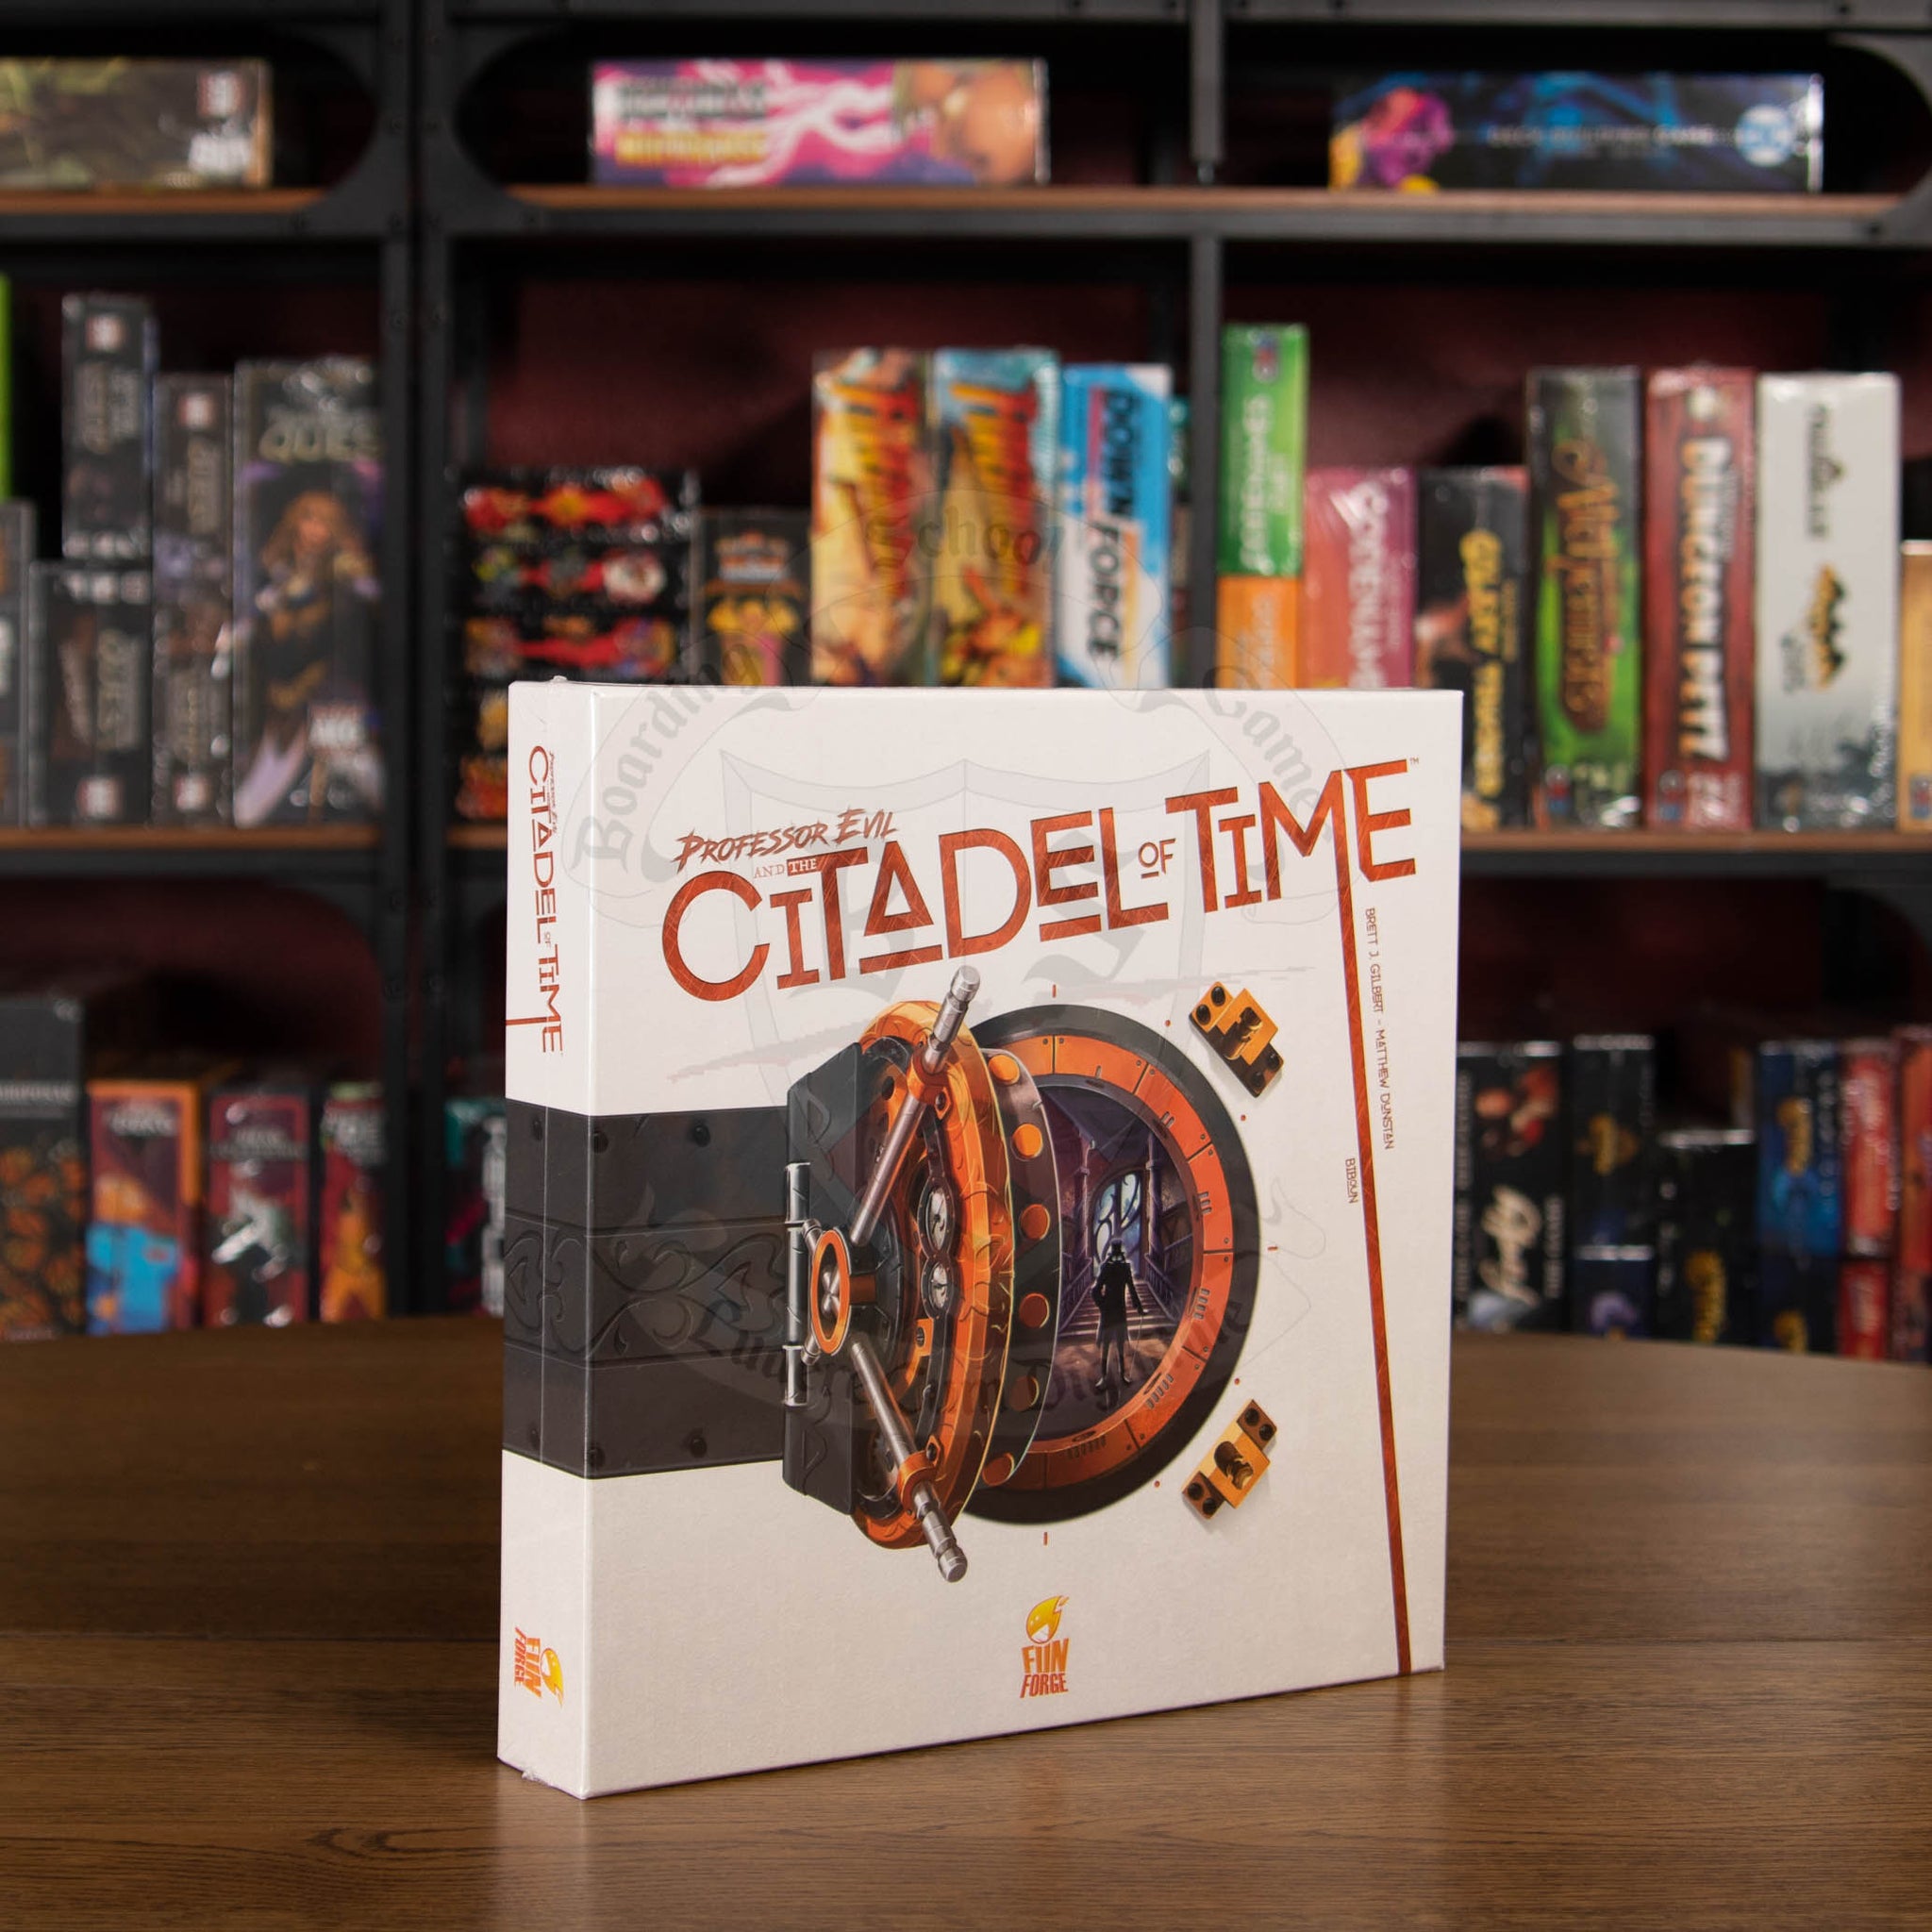 (BSG Certified USED) Professor Evil and the Citadel of Time